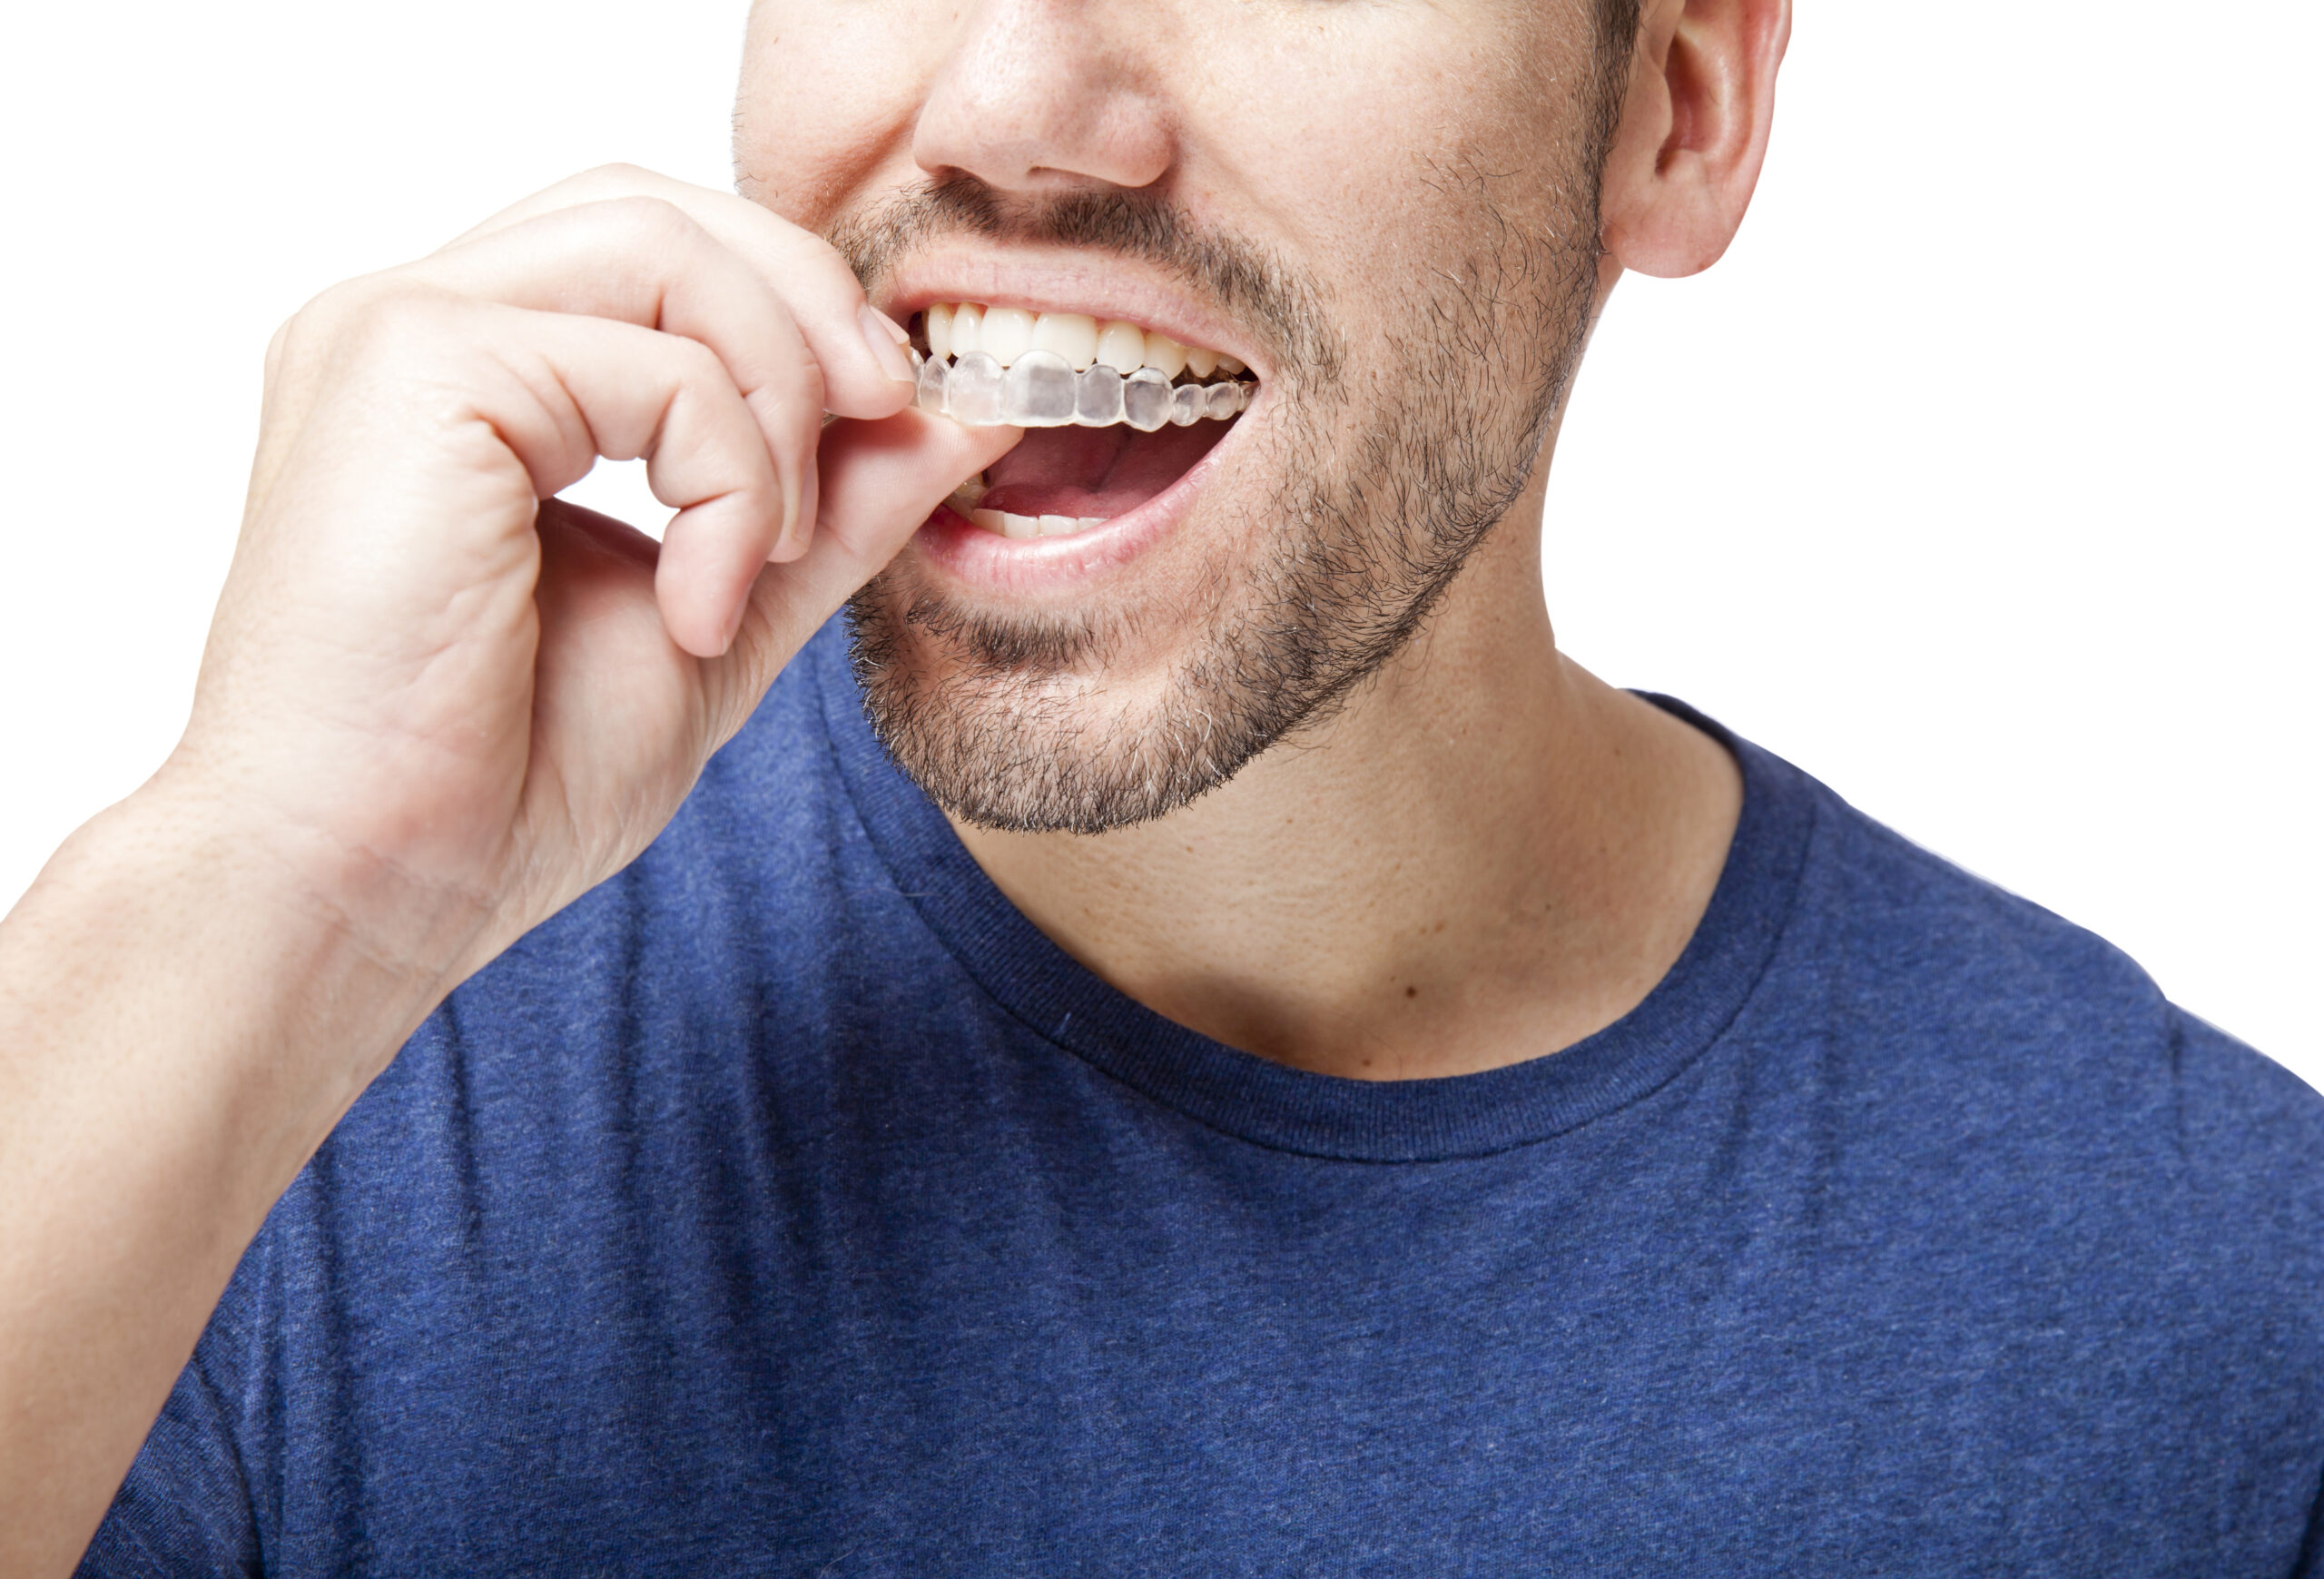 Four Things You Shouldn't Do to Achieve a Successful Invisalign Treatment